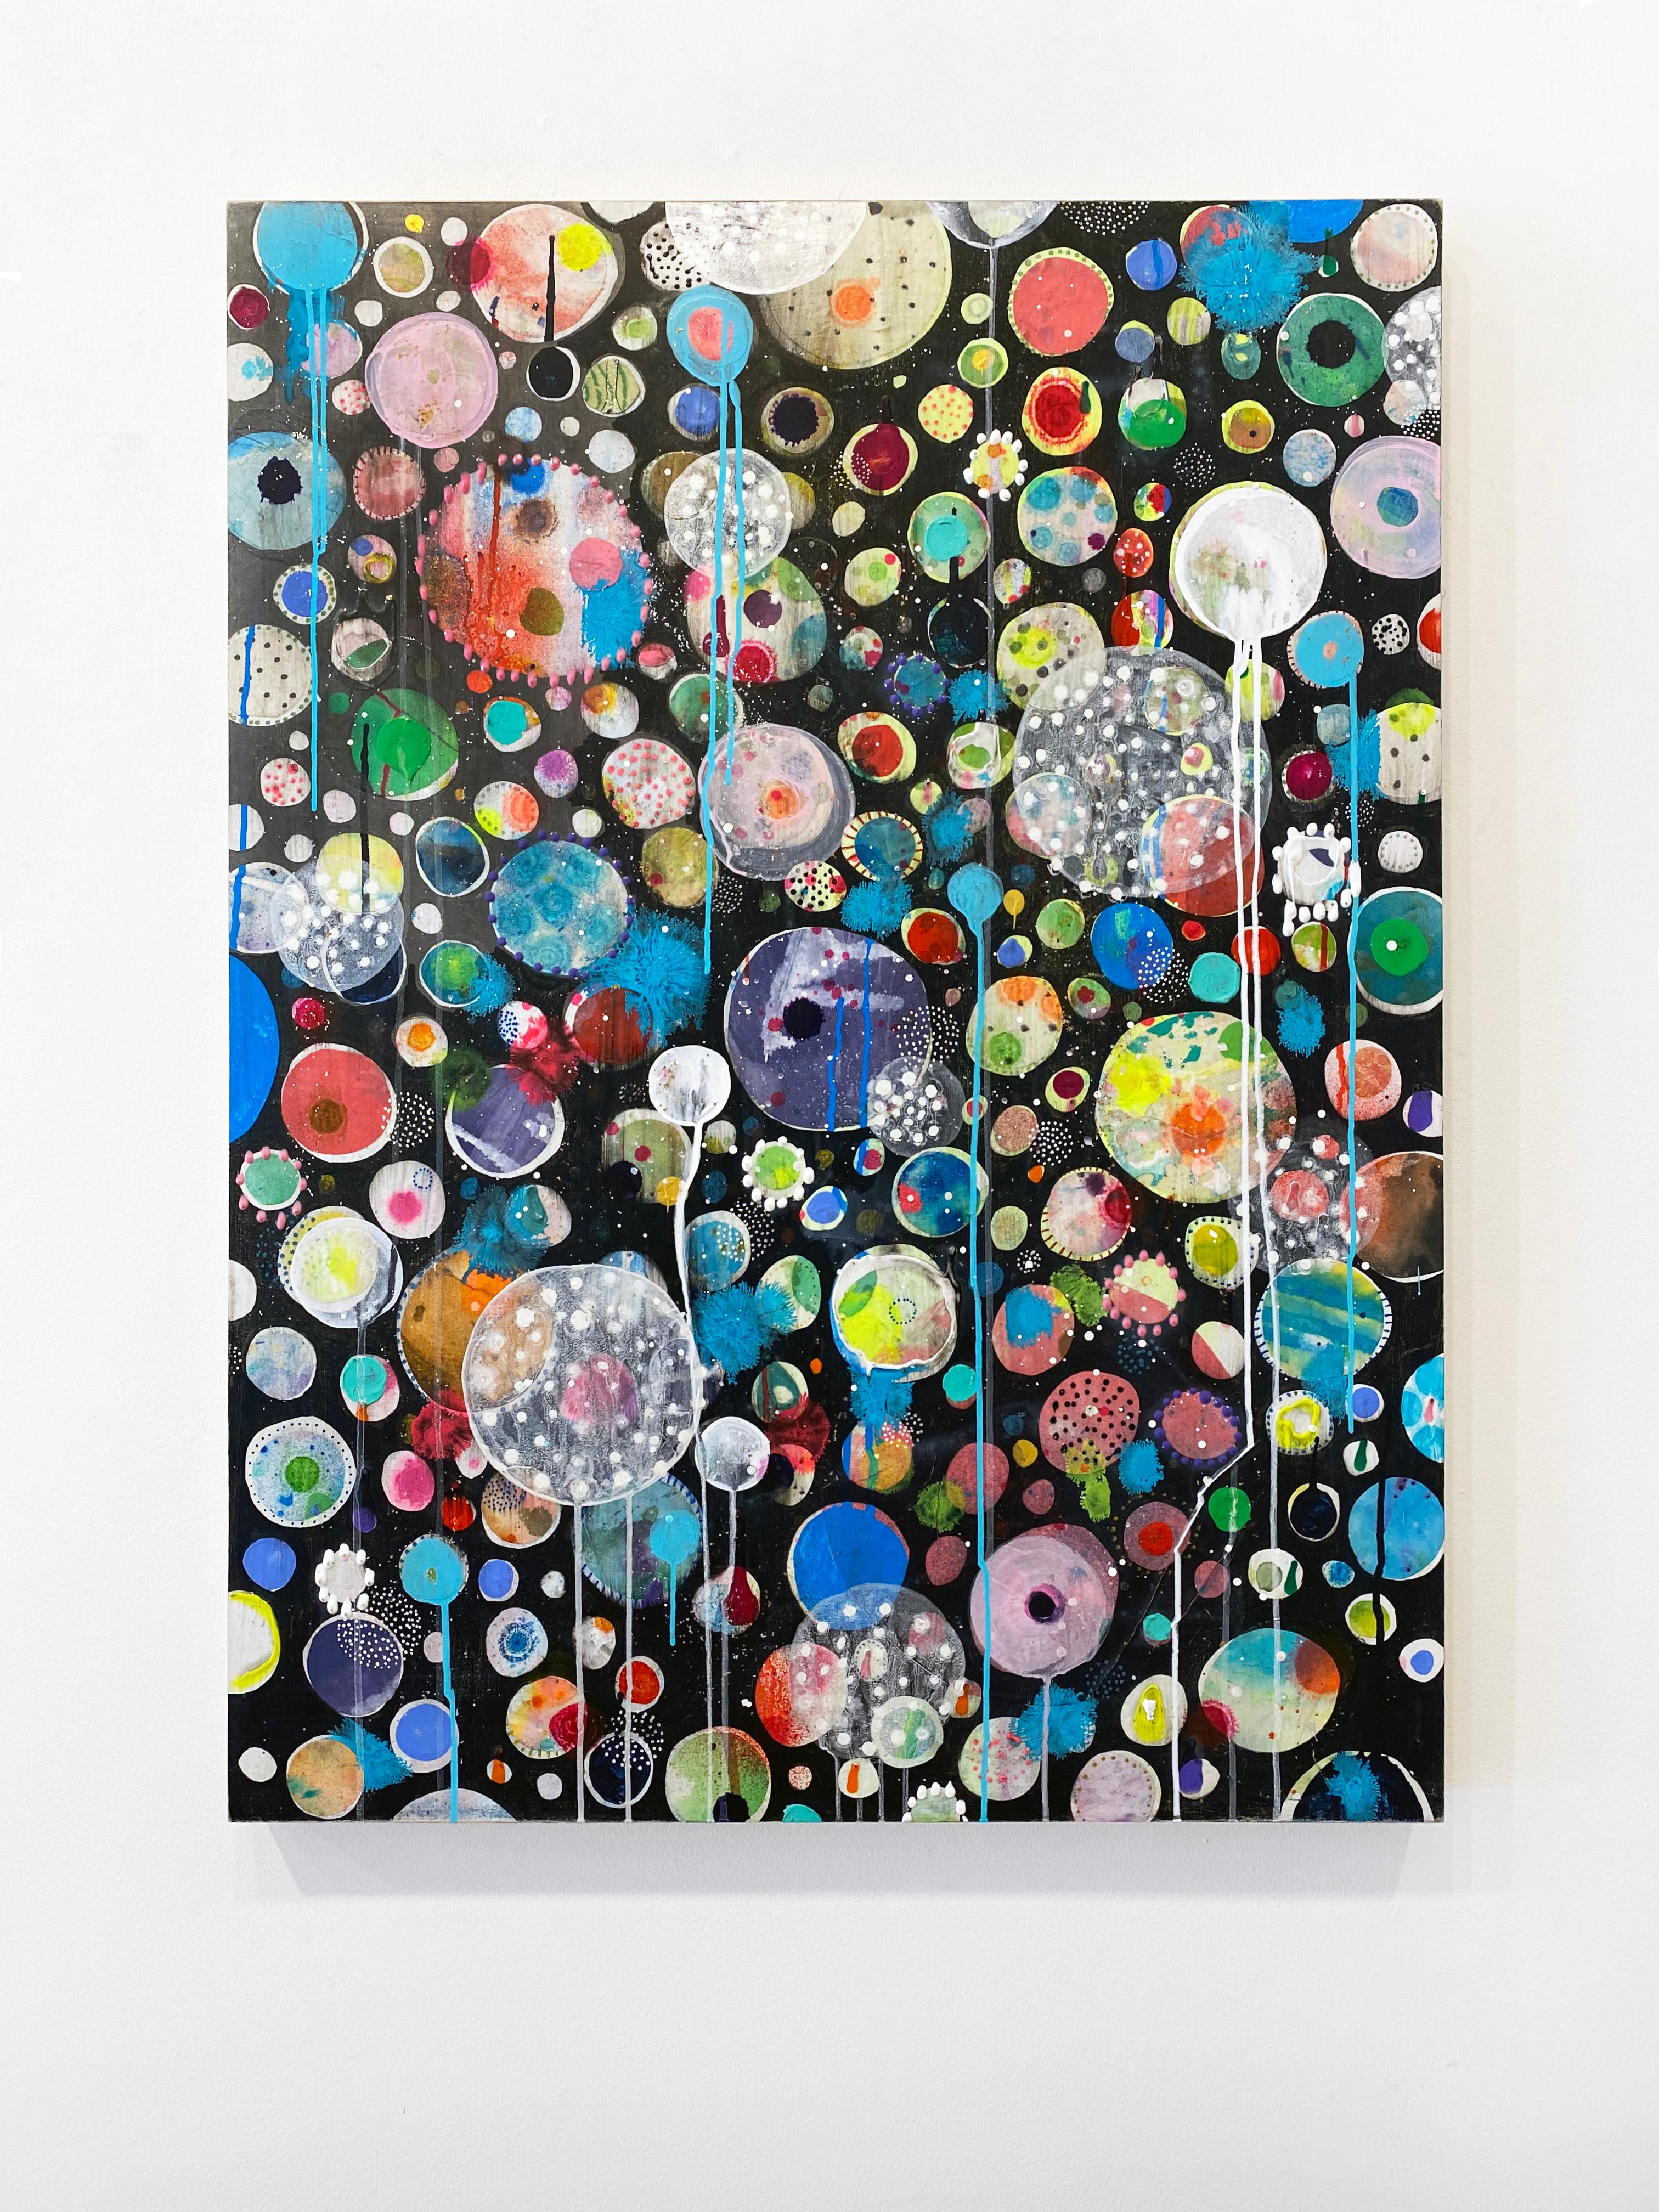 Abstract, Colorful Mixed Media Painting by Liz Tran 'Perseid I' 1